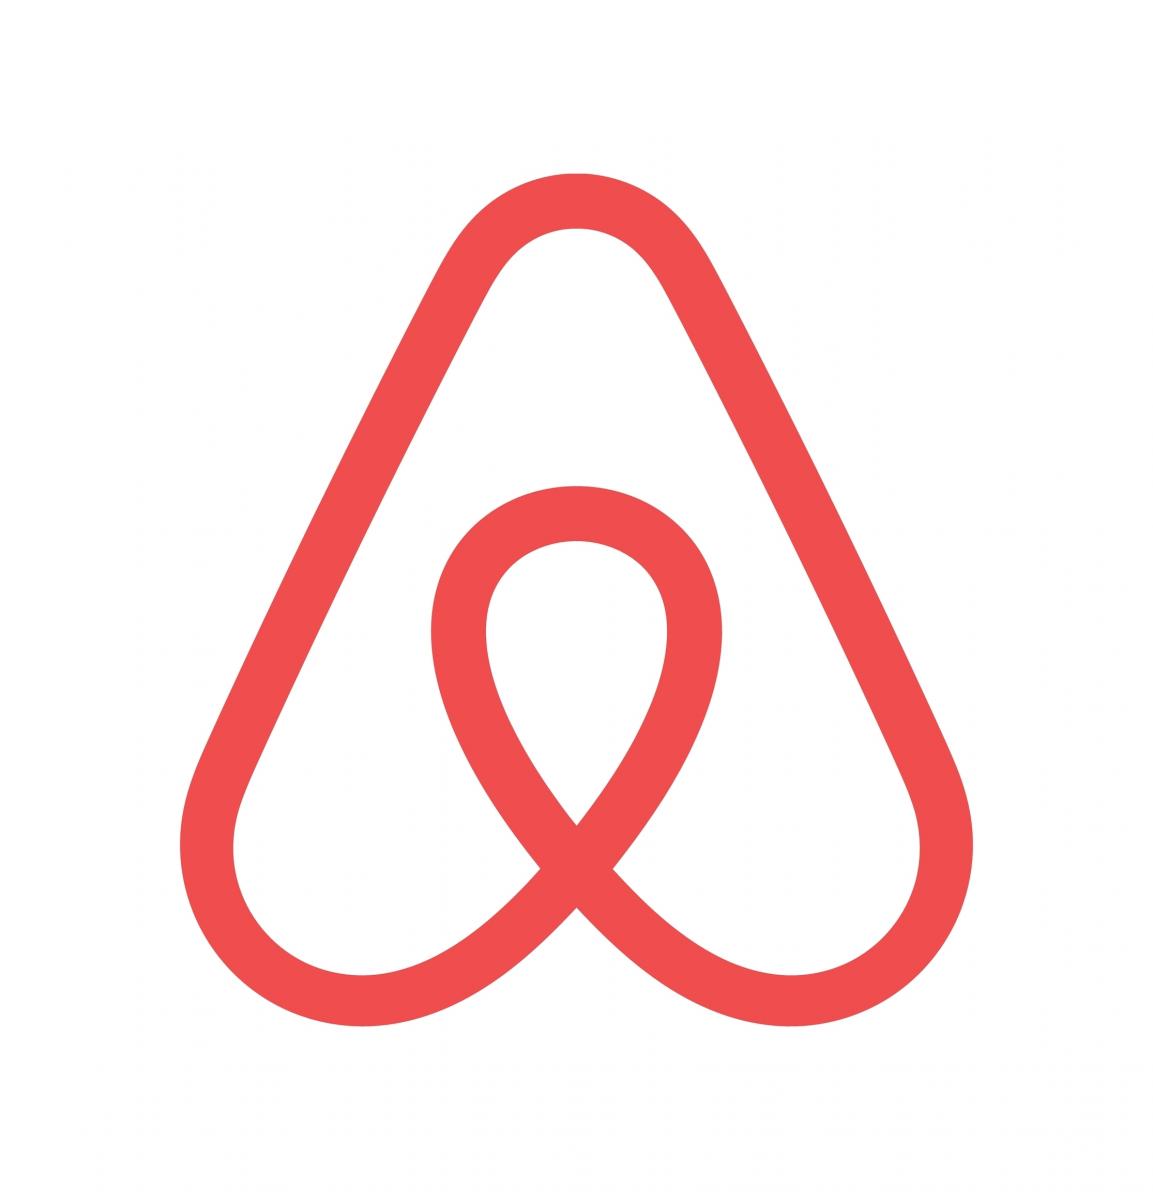 Controls over Airbnbs to be relaxed in near future